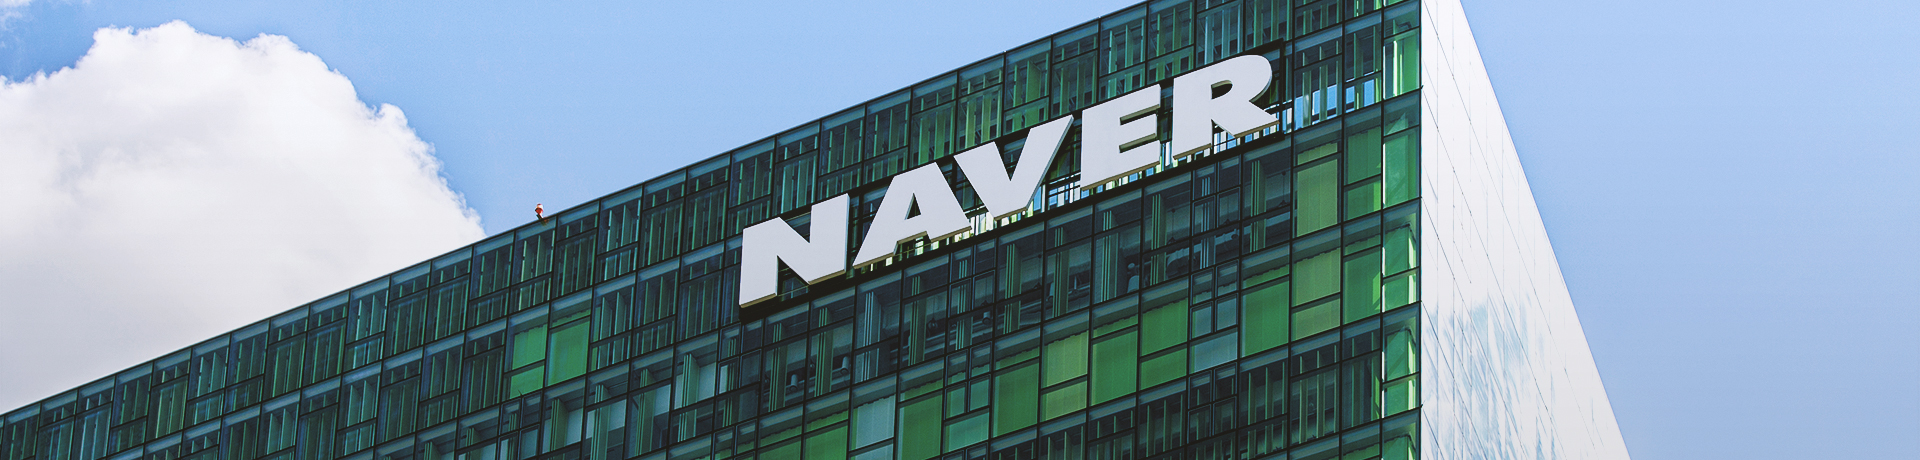 naver-invests-100-billion-won-in-sm-entertainment-2